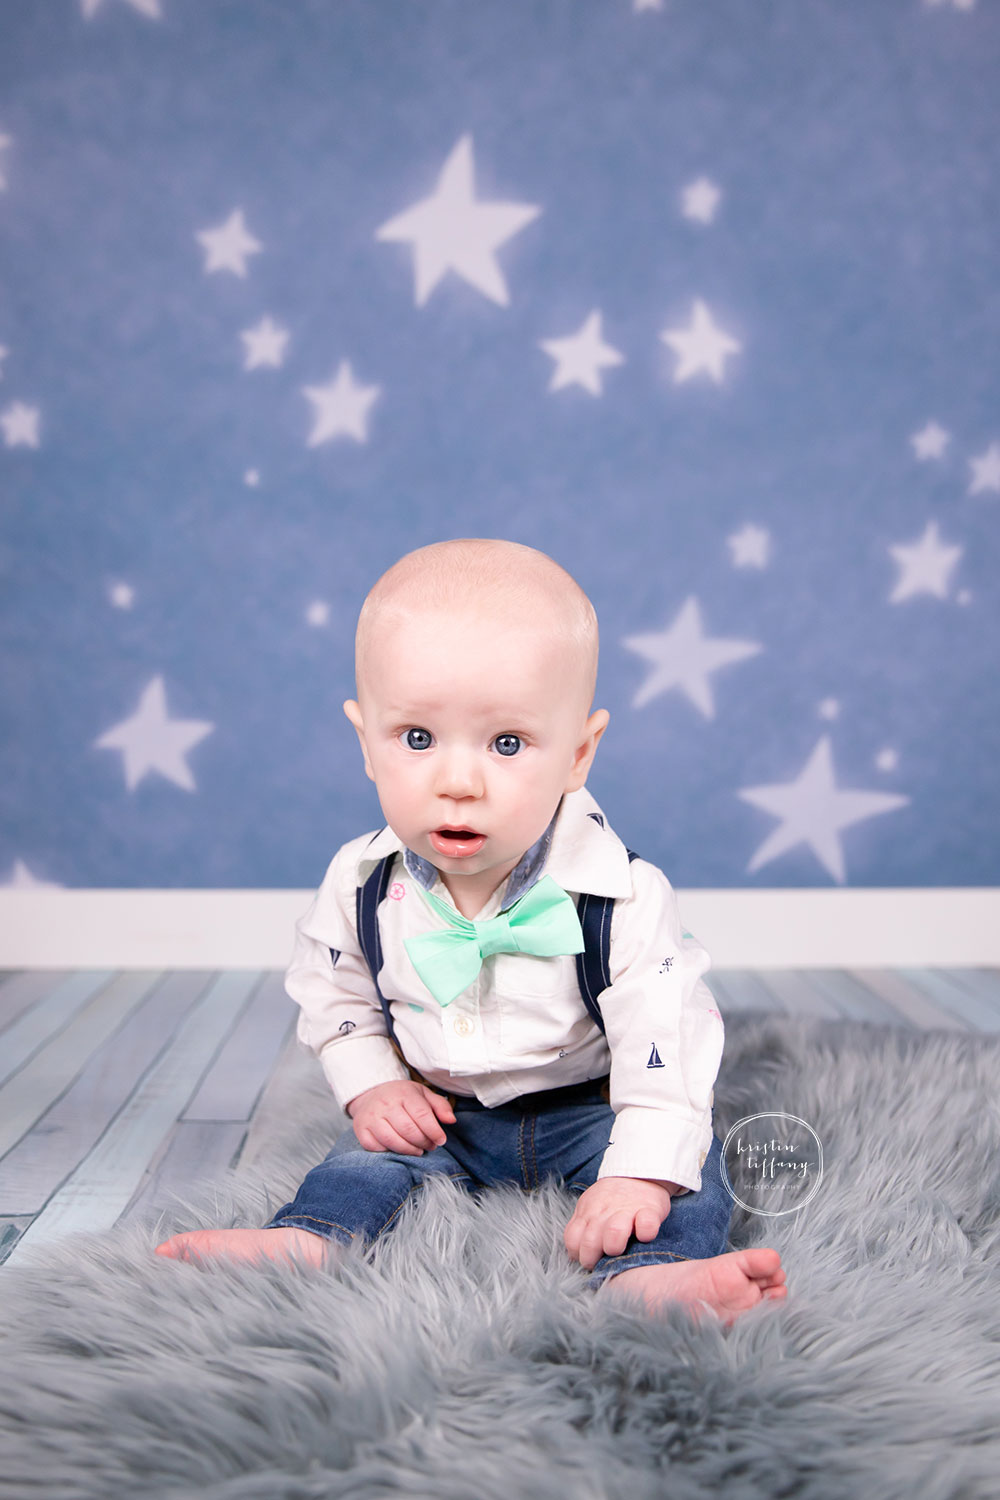 a photo of a baby boy at a sitter session photoshoot